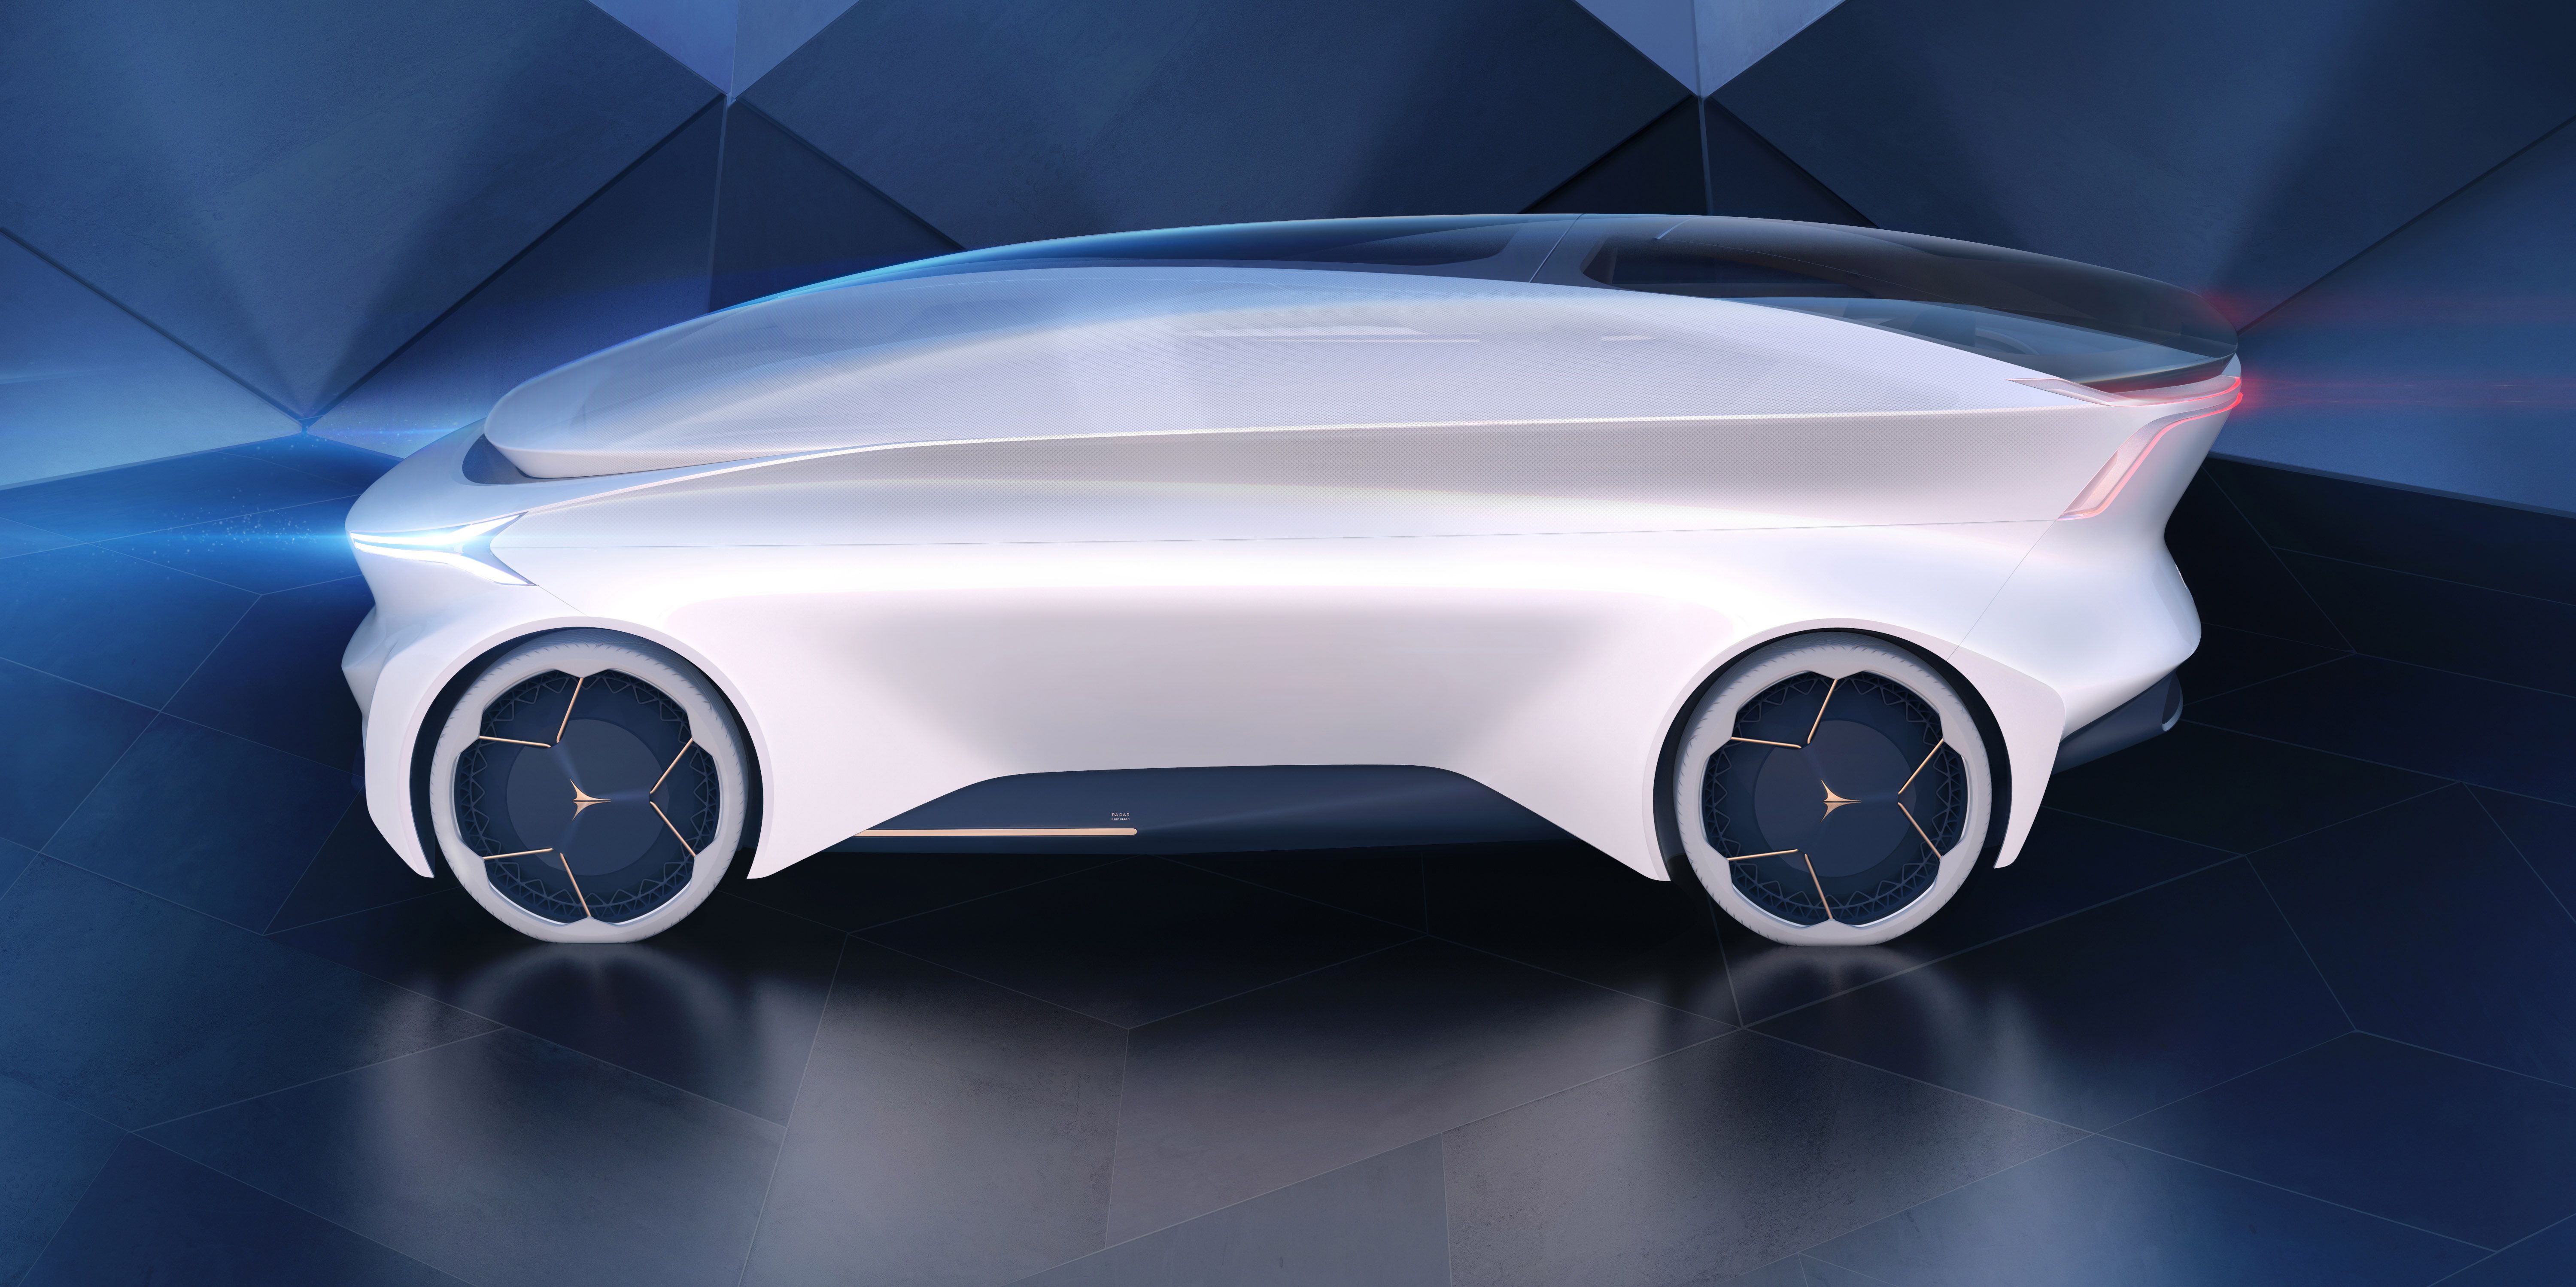 Another Self-Driving Car? Meet the Icona Nucleus